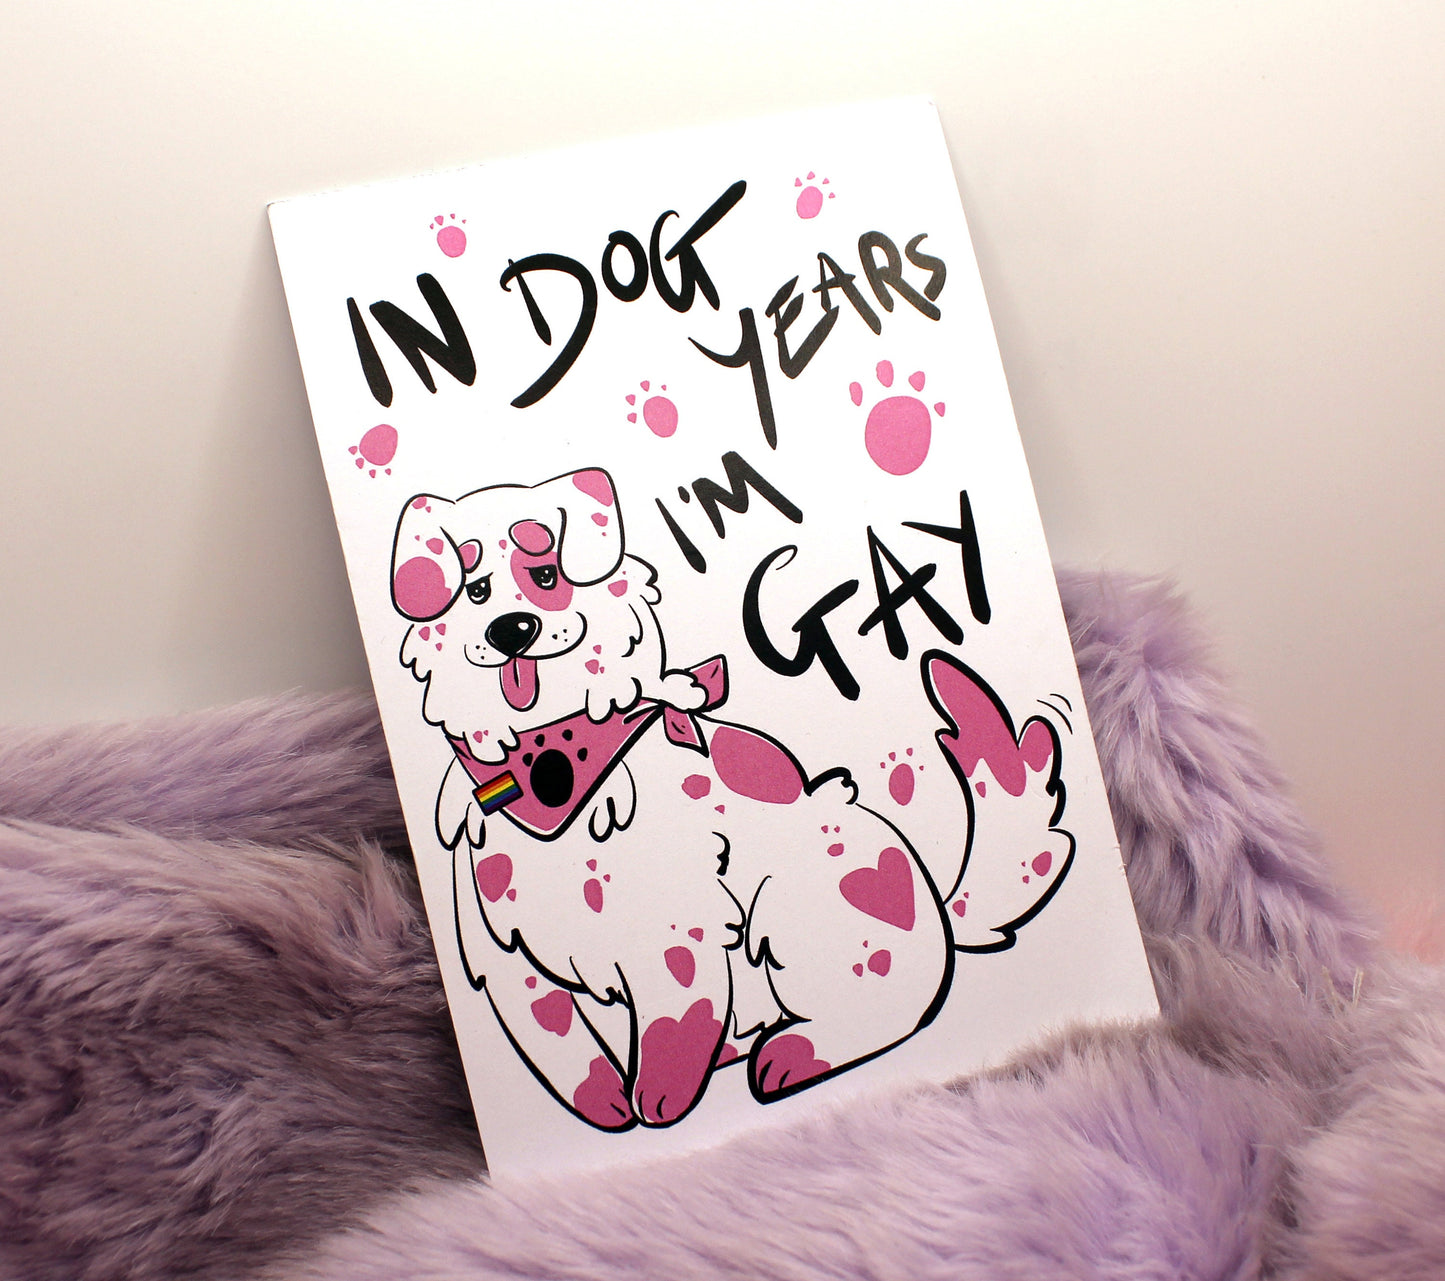 In Dog Years I'm Gay A6 Print